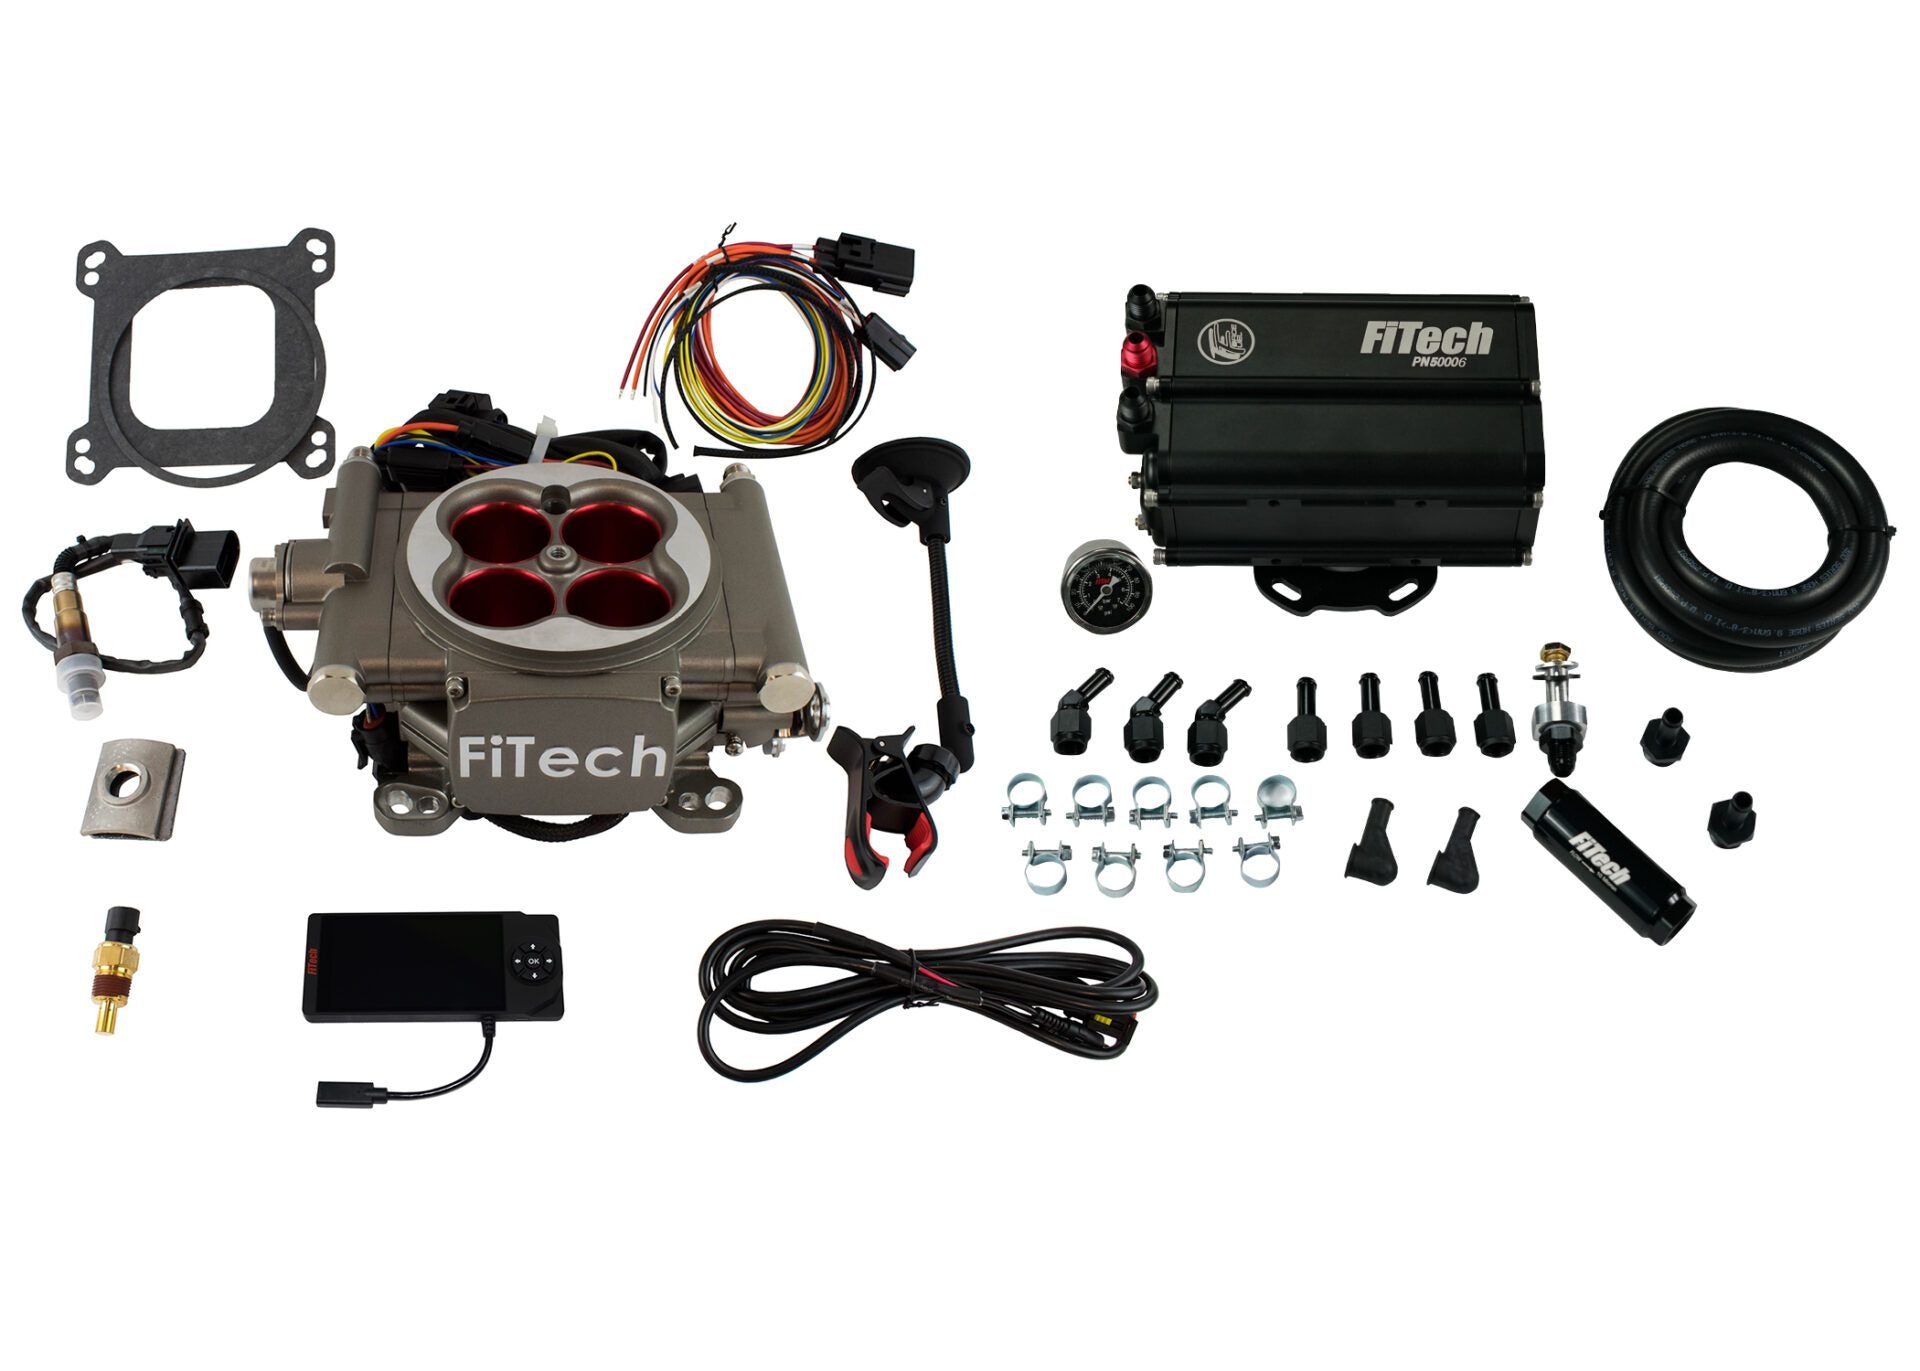 FiTech 35503 Go Street 400 HP Cast EFI System With Force Fuel Mini Delivery Master Kit